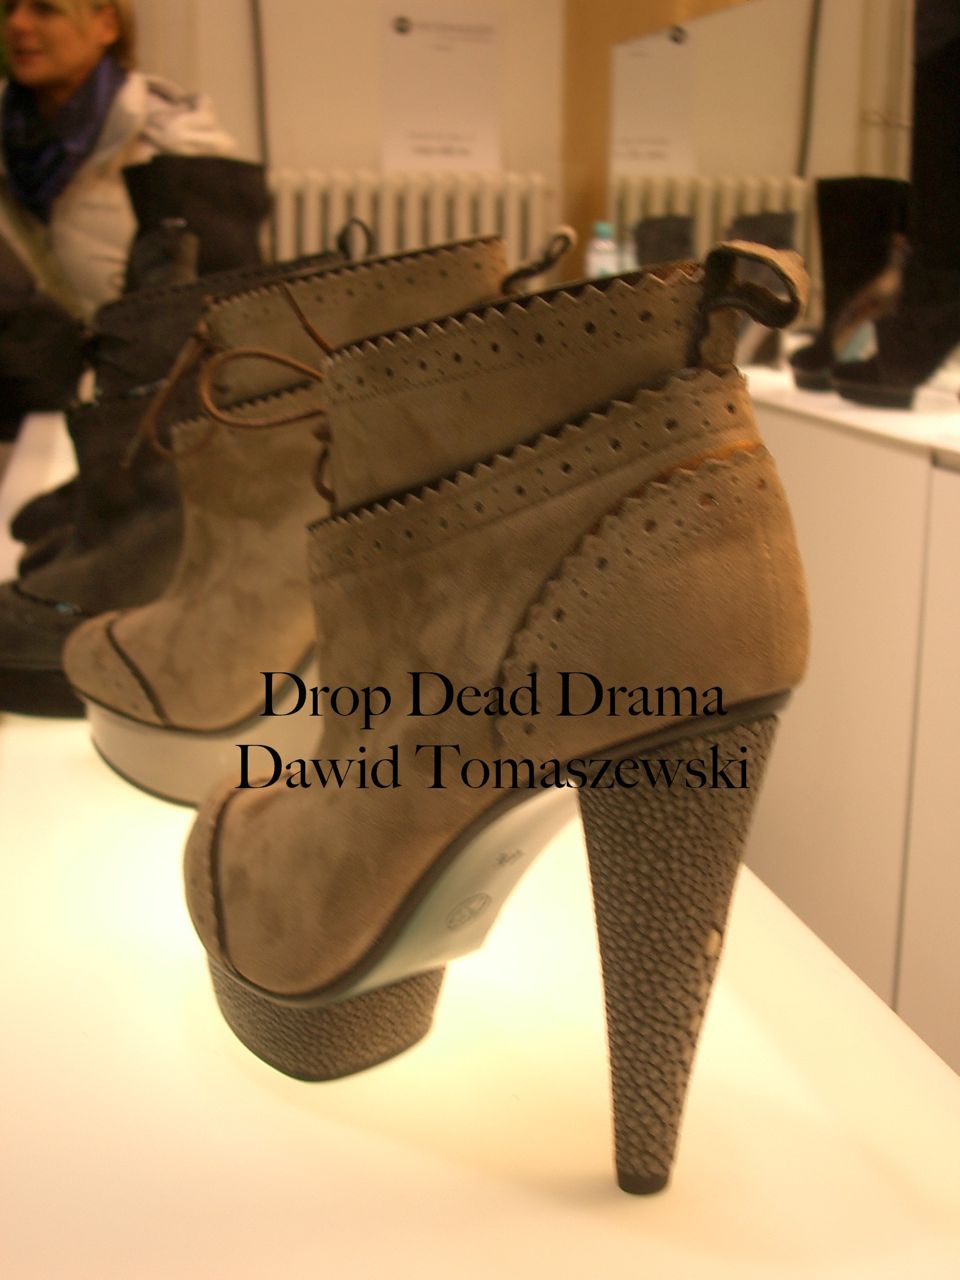 You are currently viewing <!--:en-->Drop Dead Drama!!!Orginal Shoes From Dawid Tomaszewski<!--:-->